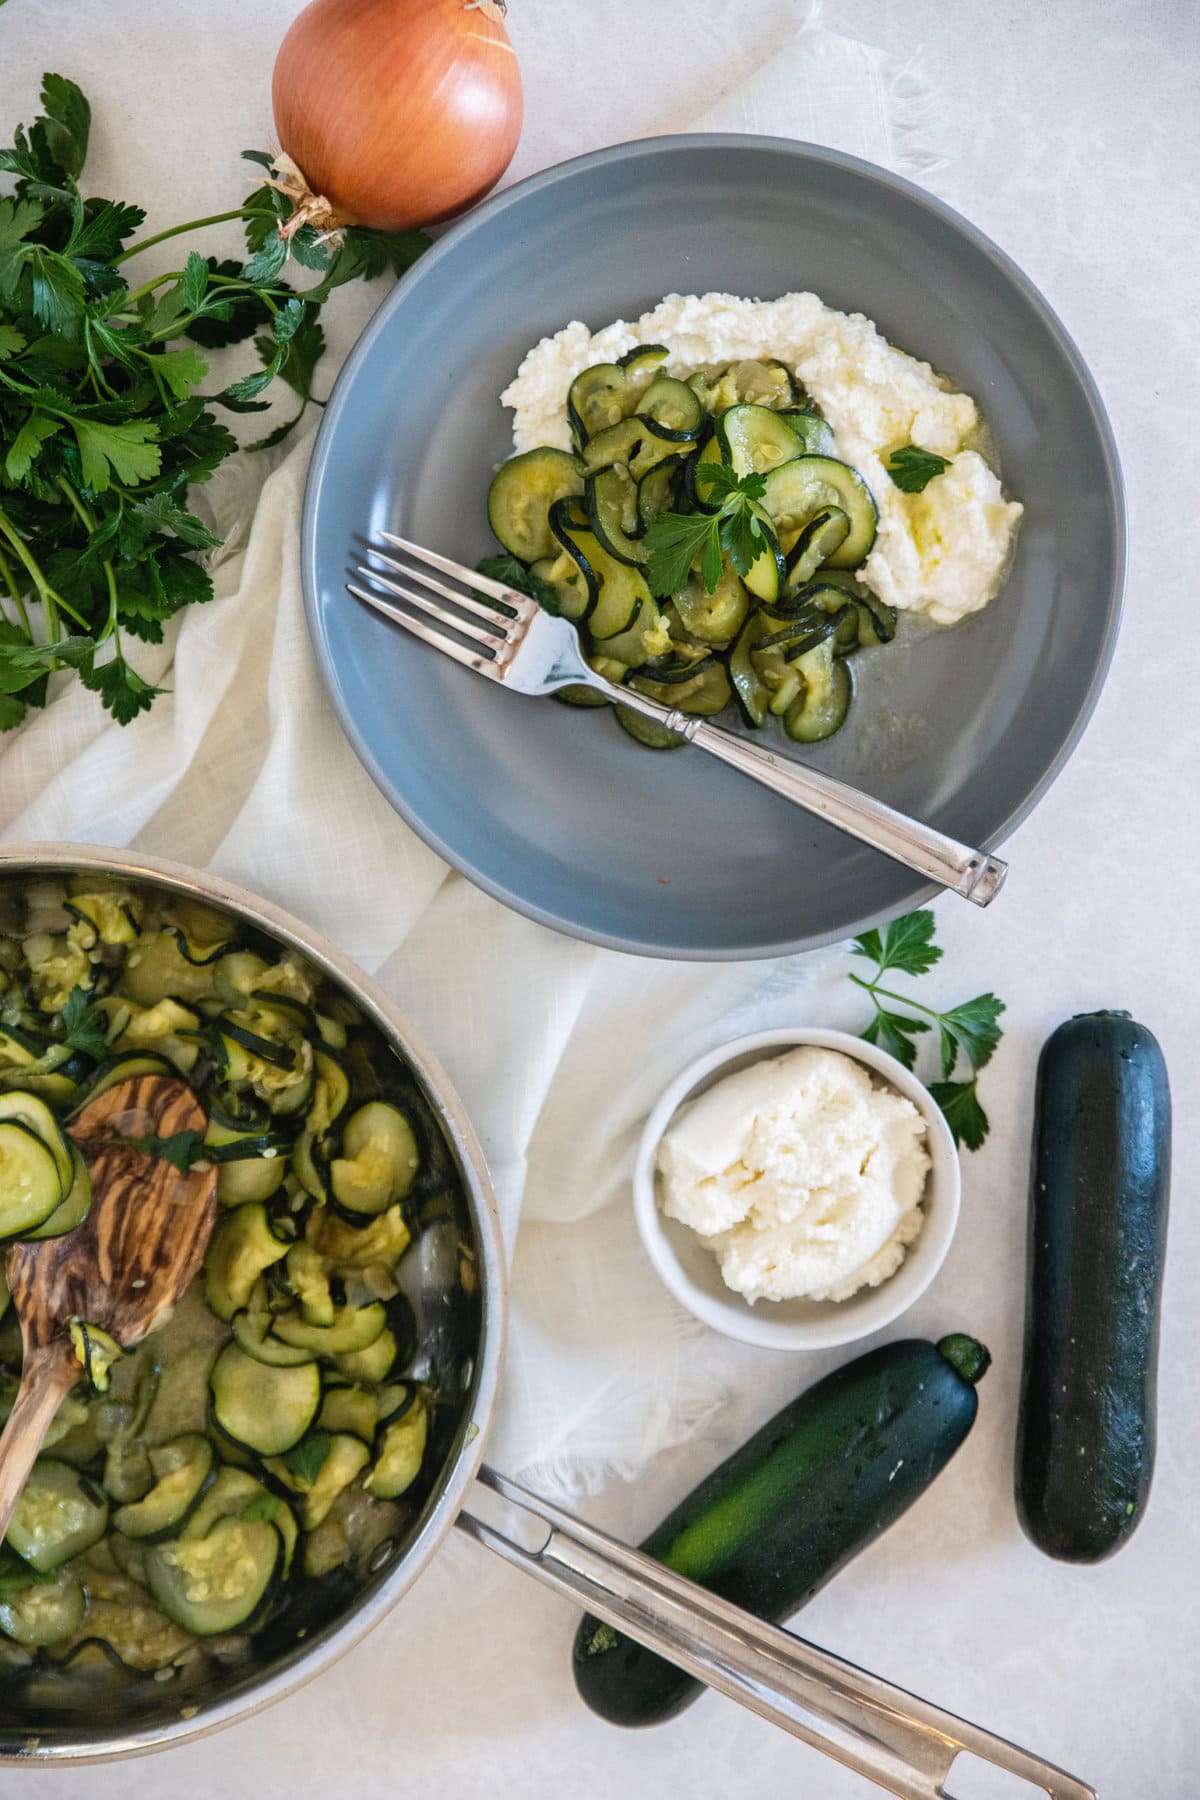 fresh onions and zucchini with a bowl of ricotta to show the ingredients in this dish